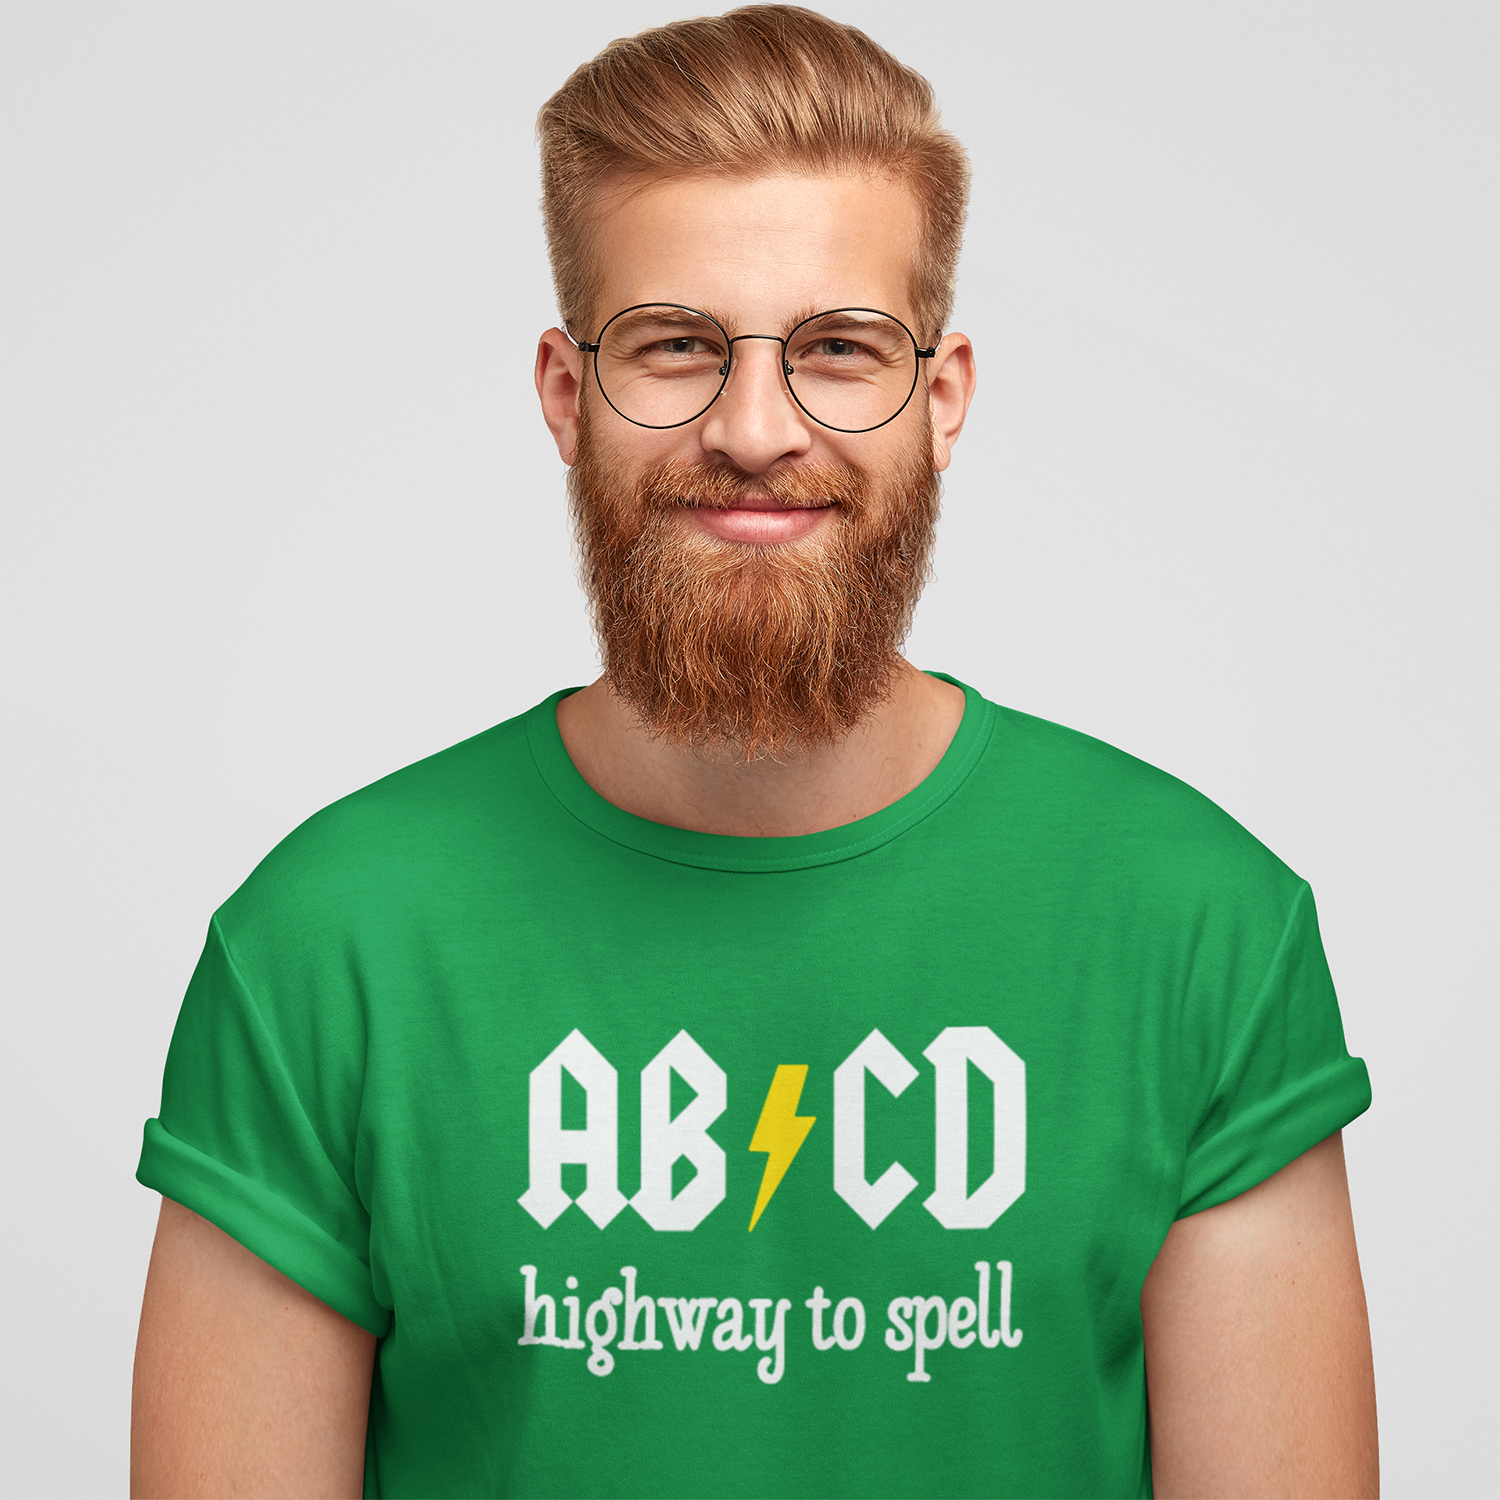 ABCD - Highway to spell' volwassene shirt